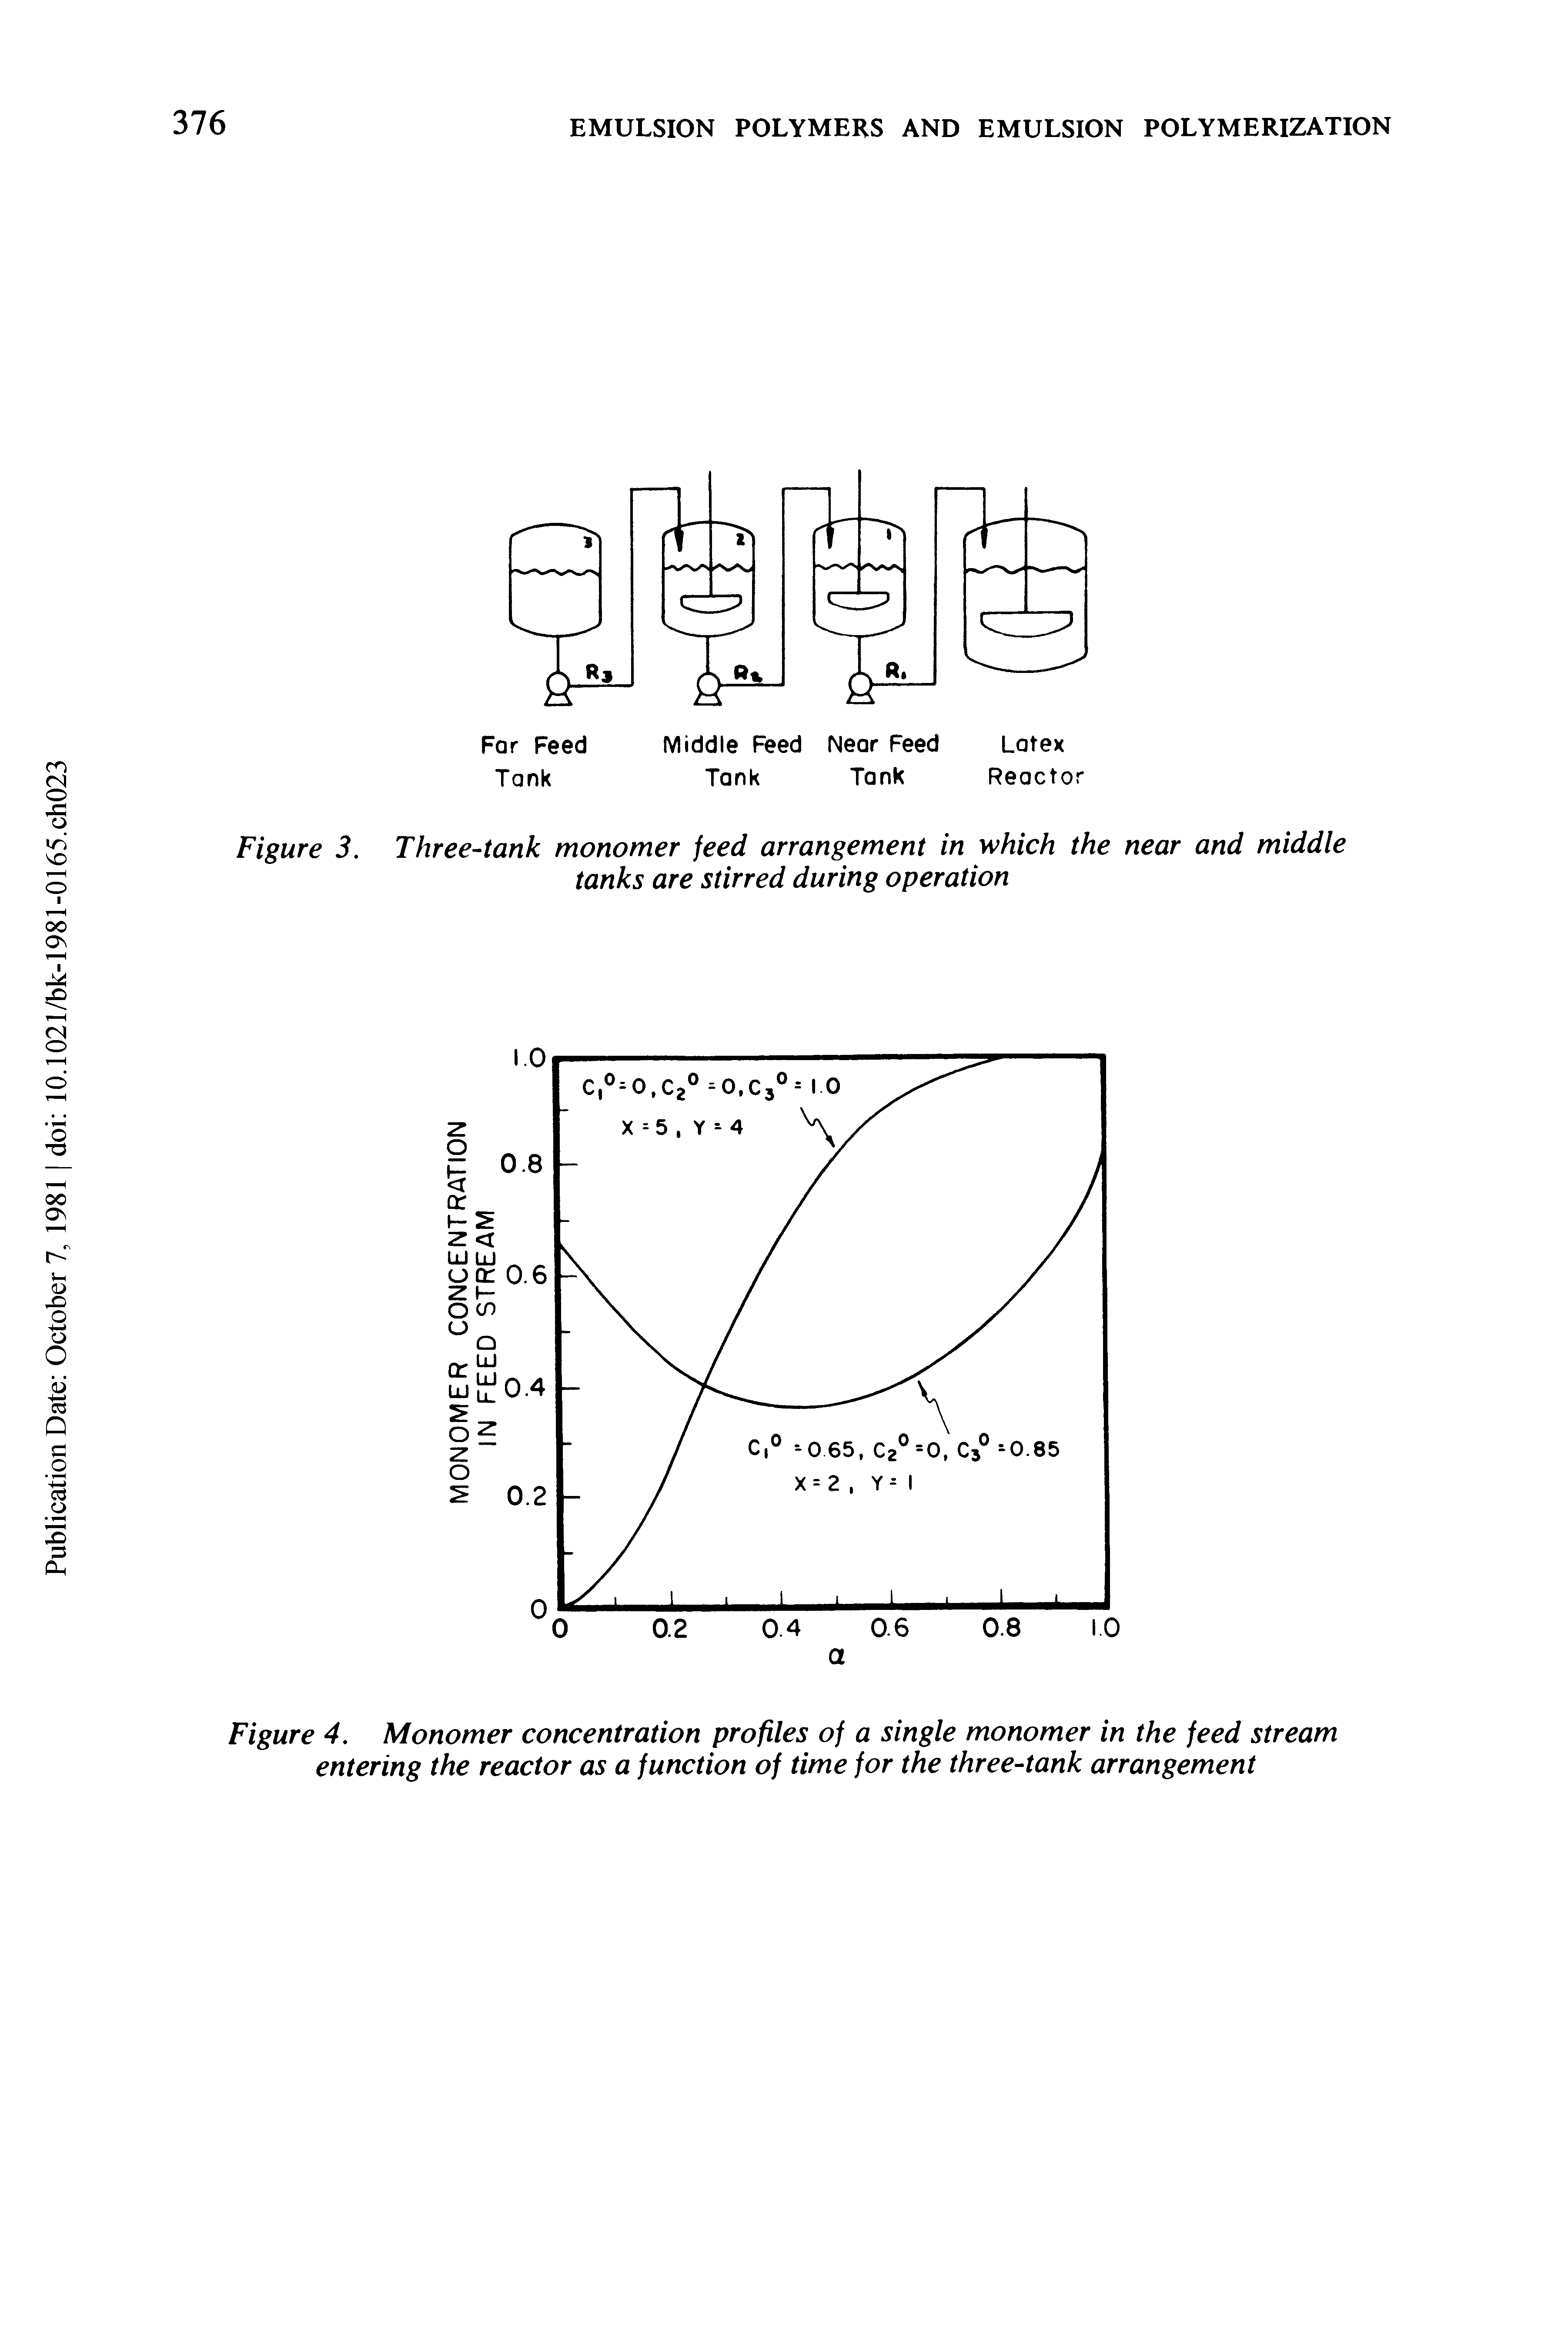 Figure 4. Monomer concentration profiles of a single monomer in the feed stream entering the reactor as a function of time for the three-tank arrangement...